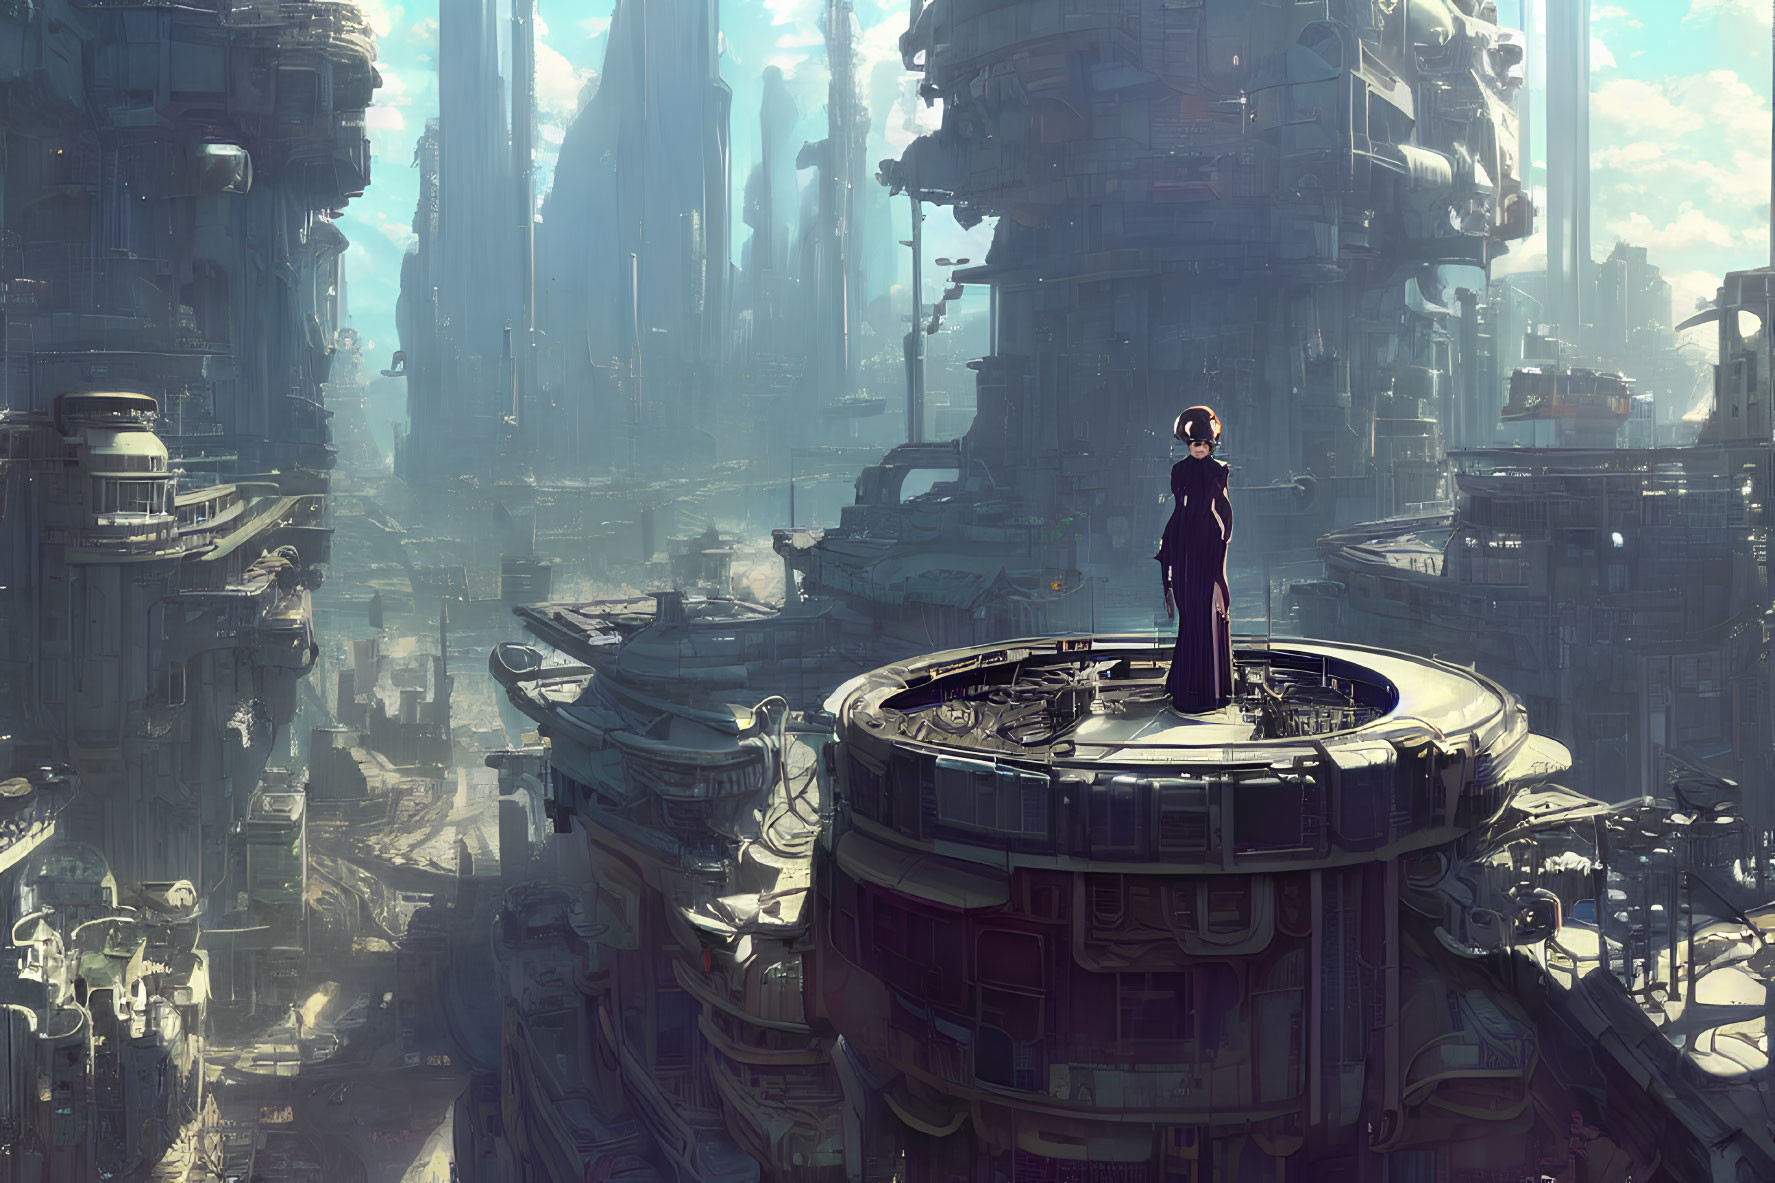 Futuristic cityscape with solitary figure on structure